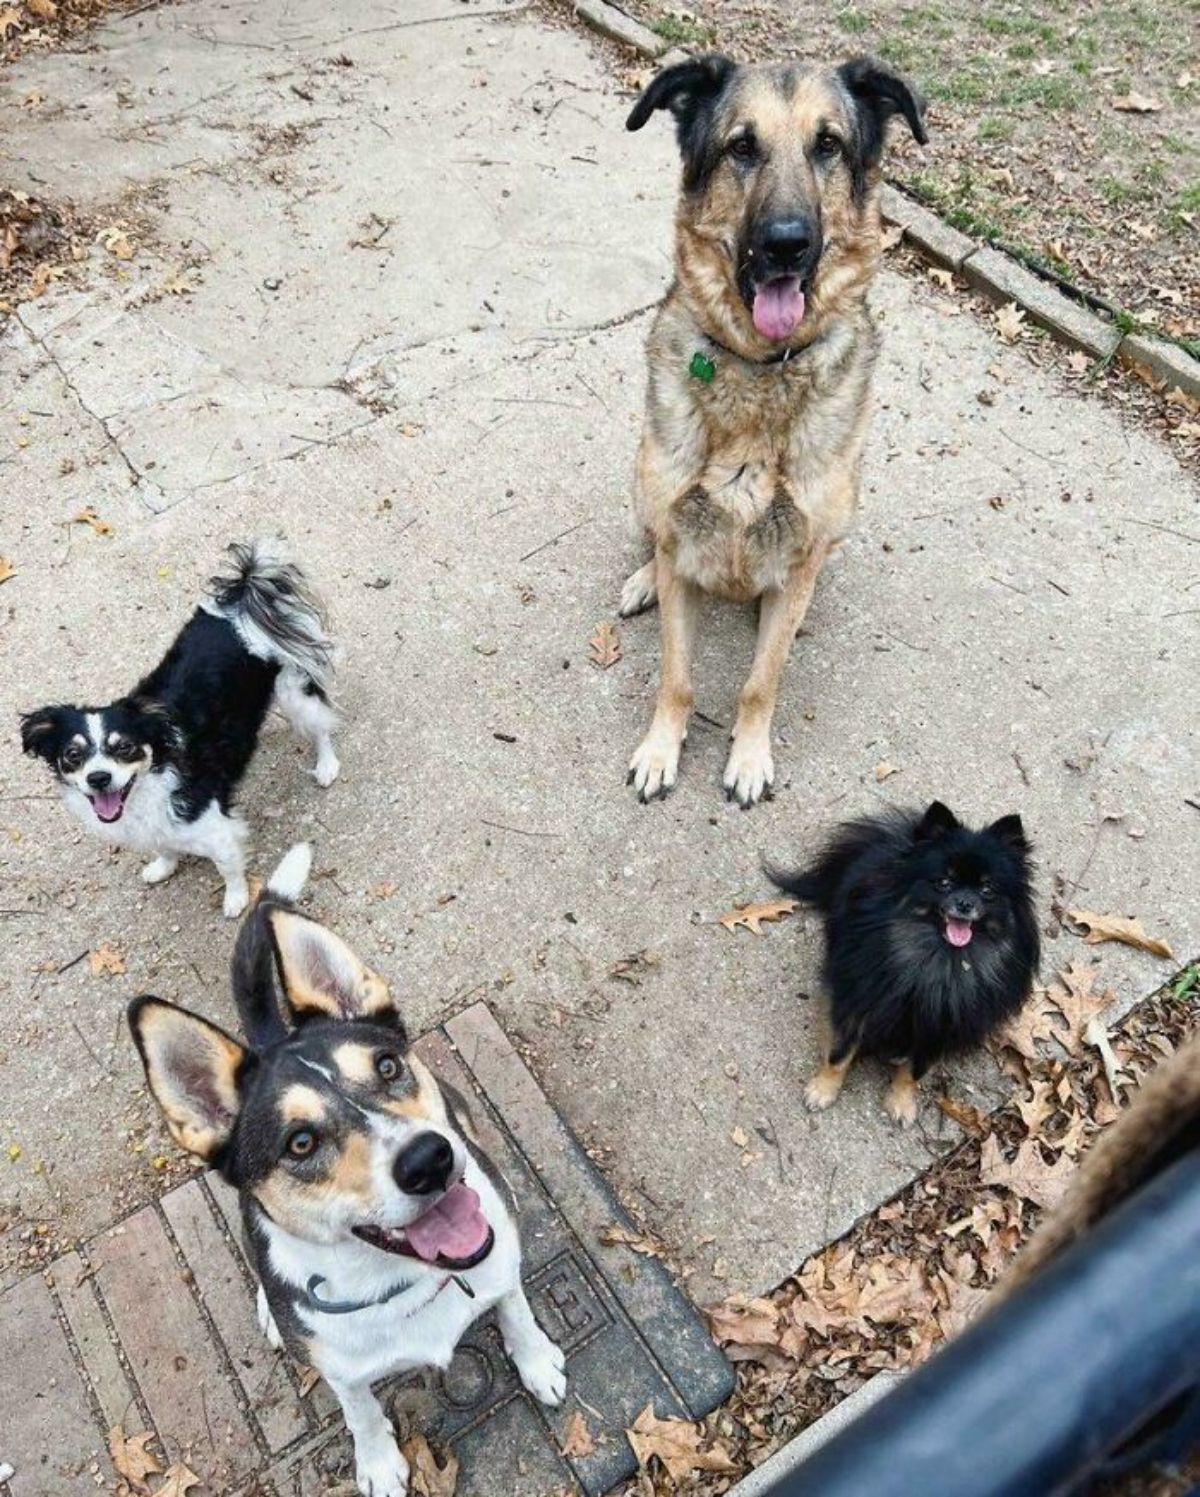 1 small black and white dog, 1 large brown and black dog, 1 medium sized black white and brown dog and 1 small black and brown dog looking up